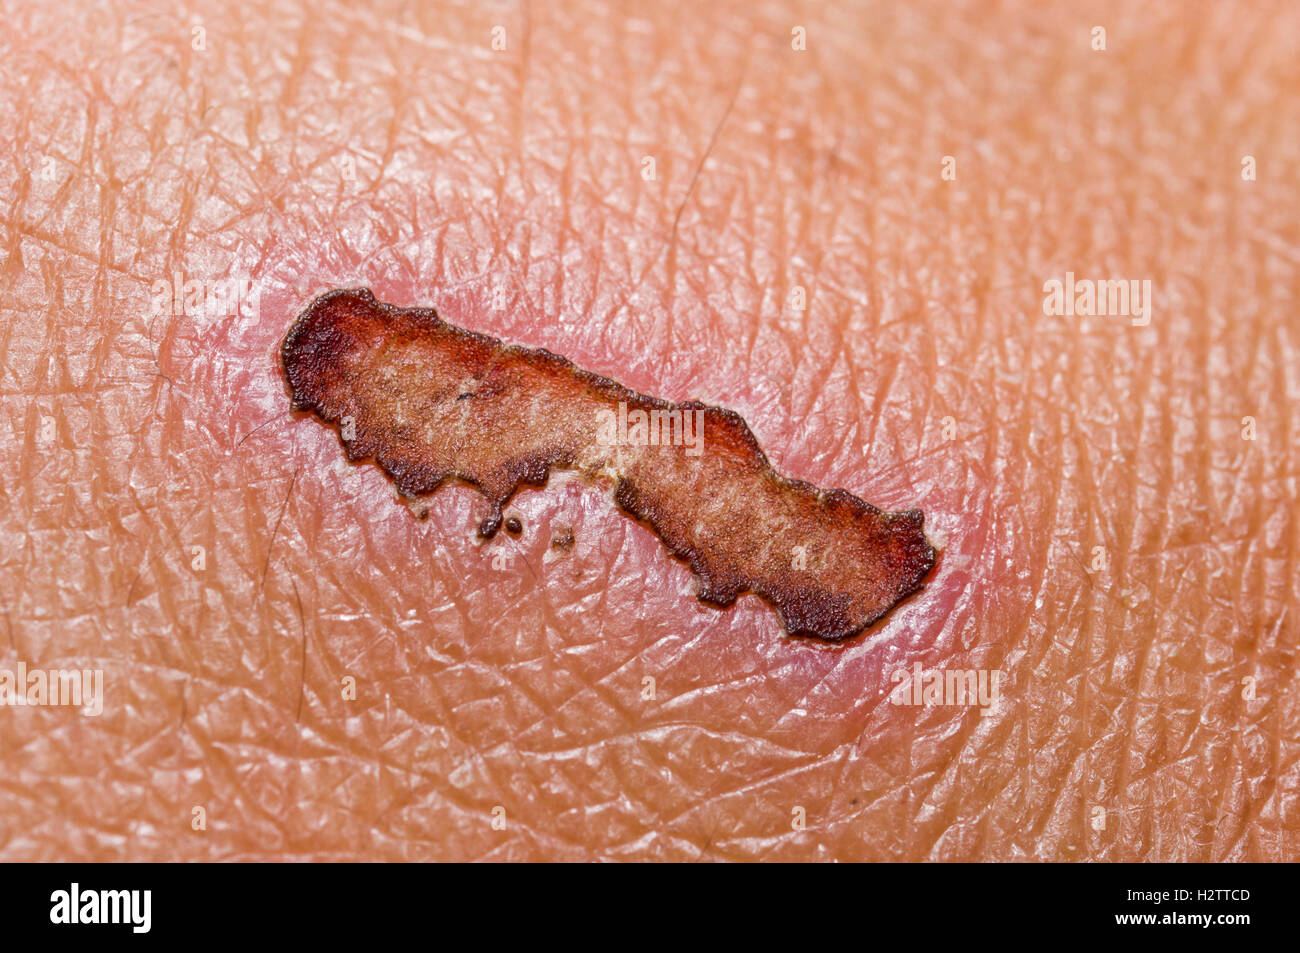 Close up to a scab Stock Photo